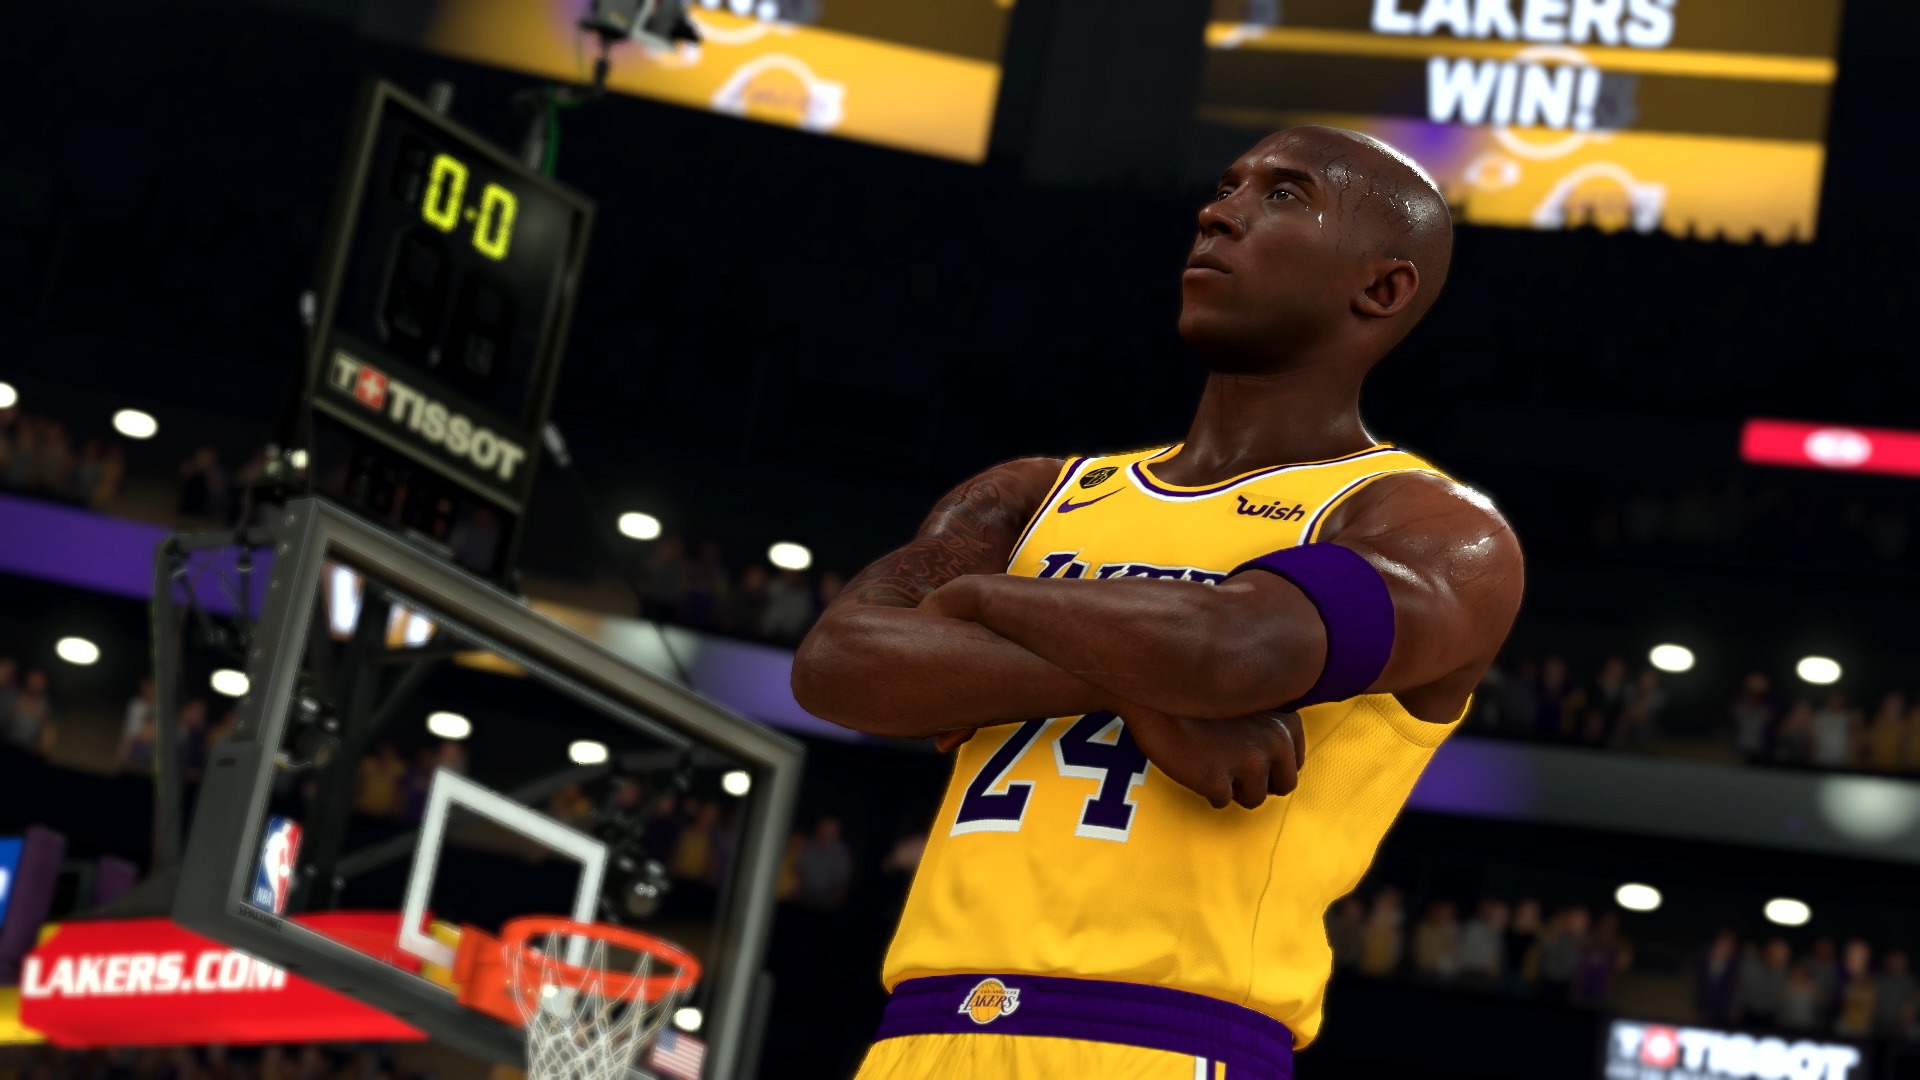 Download Legendary Los Angeles Laker Kobe Bryant In Action On The